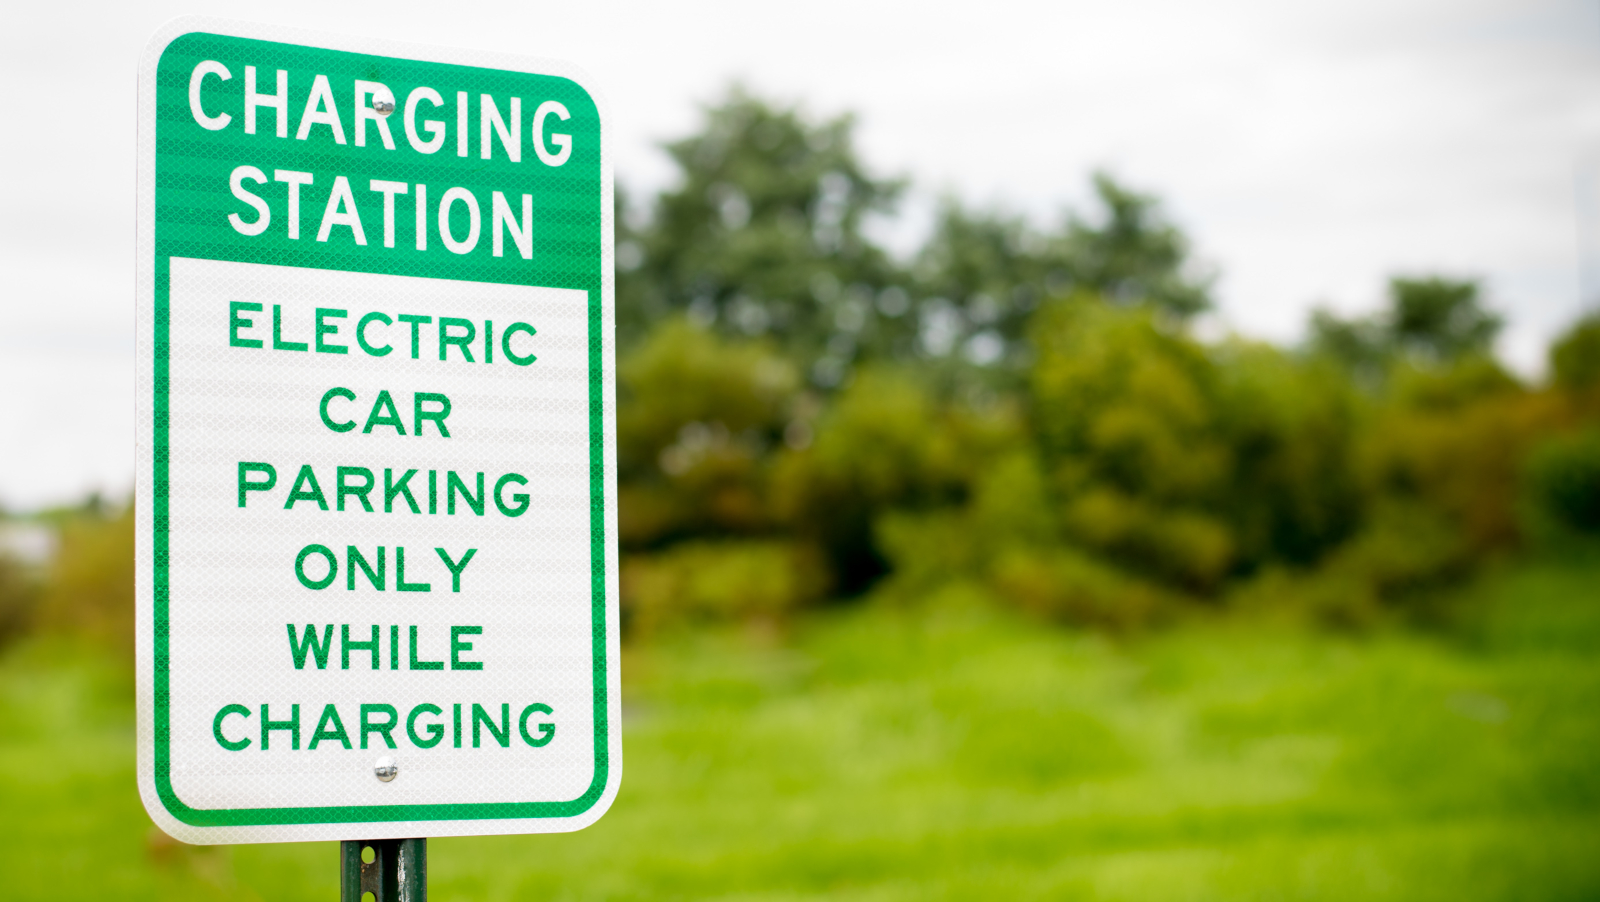 A charging station sign.